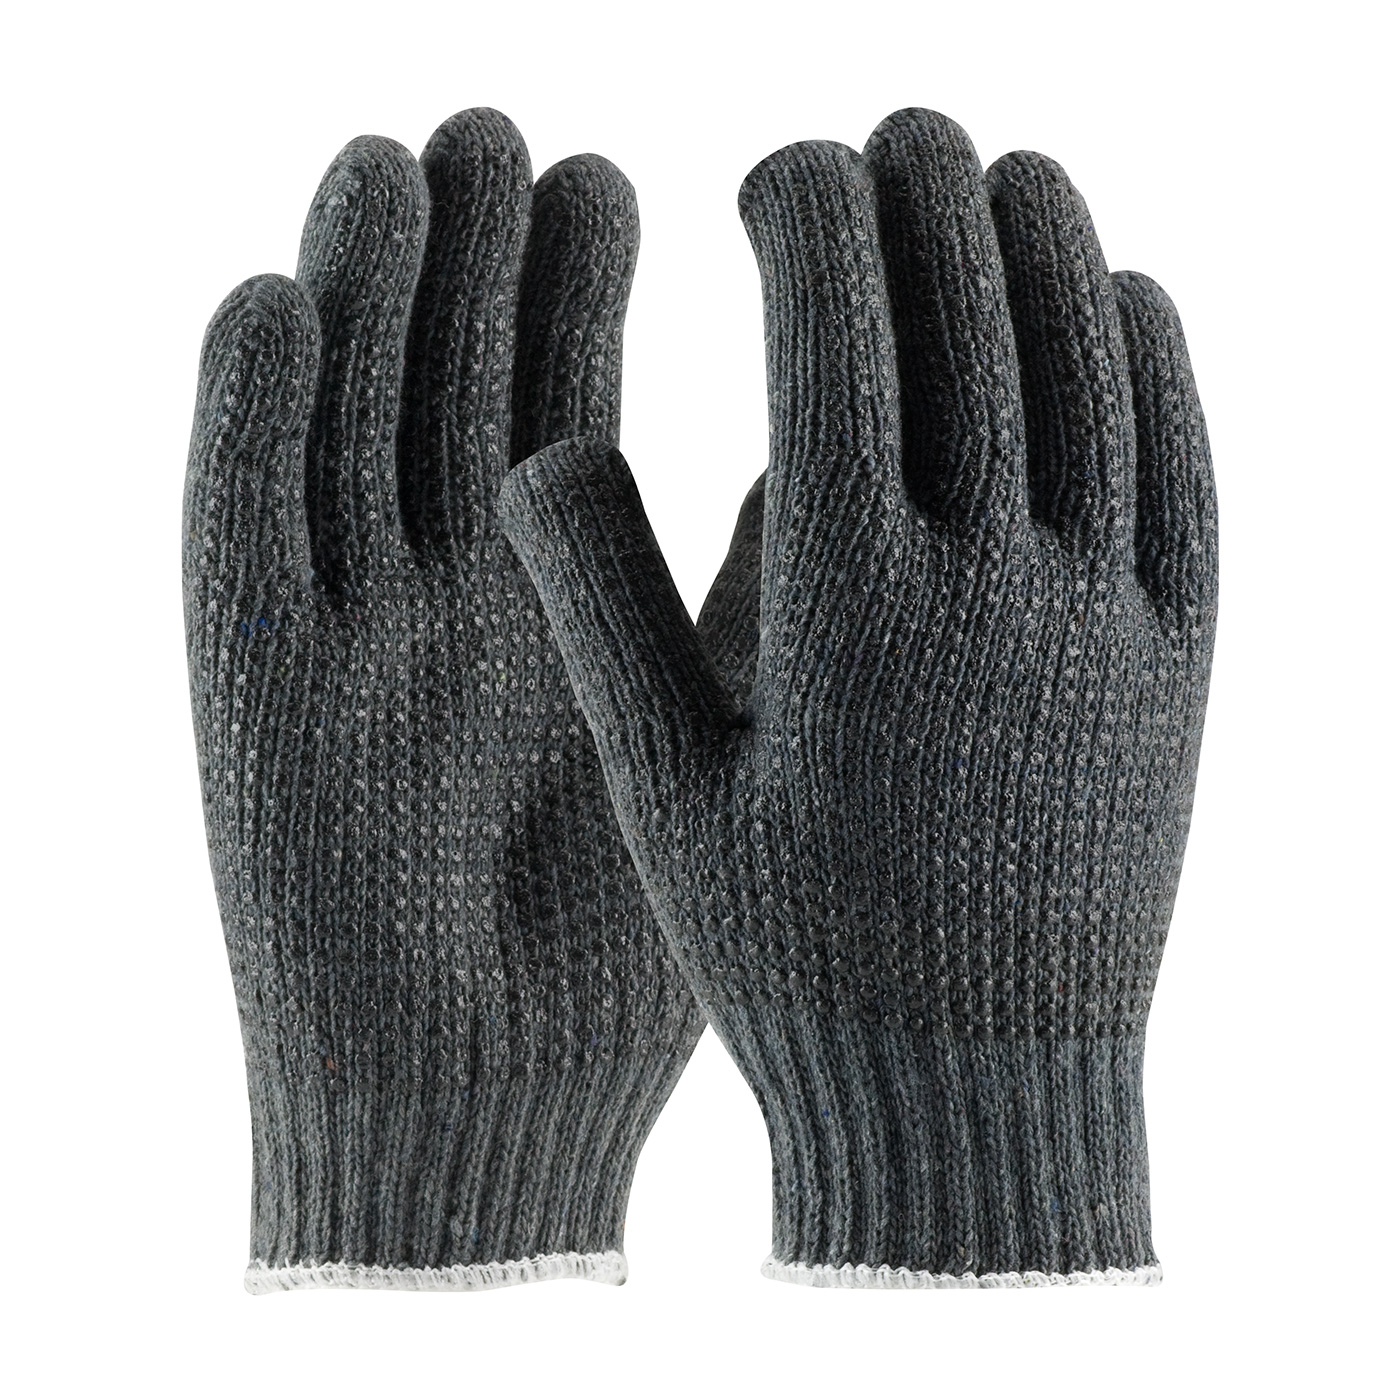 PIP®  Seamless Knit Cotton / Polyester Glove with Double-Sided PVC Dot Grip - 7 Gauge. #37-C500PDD